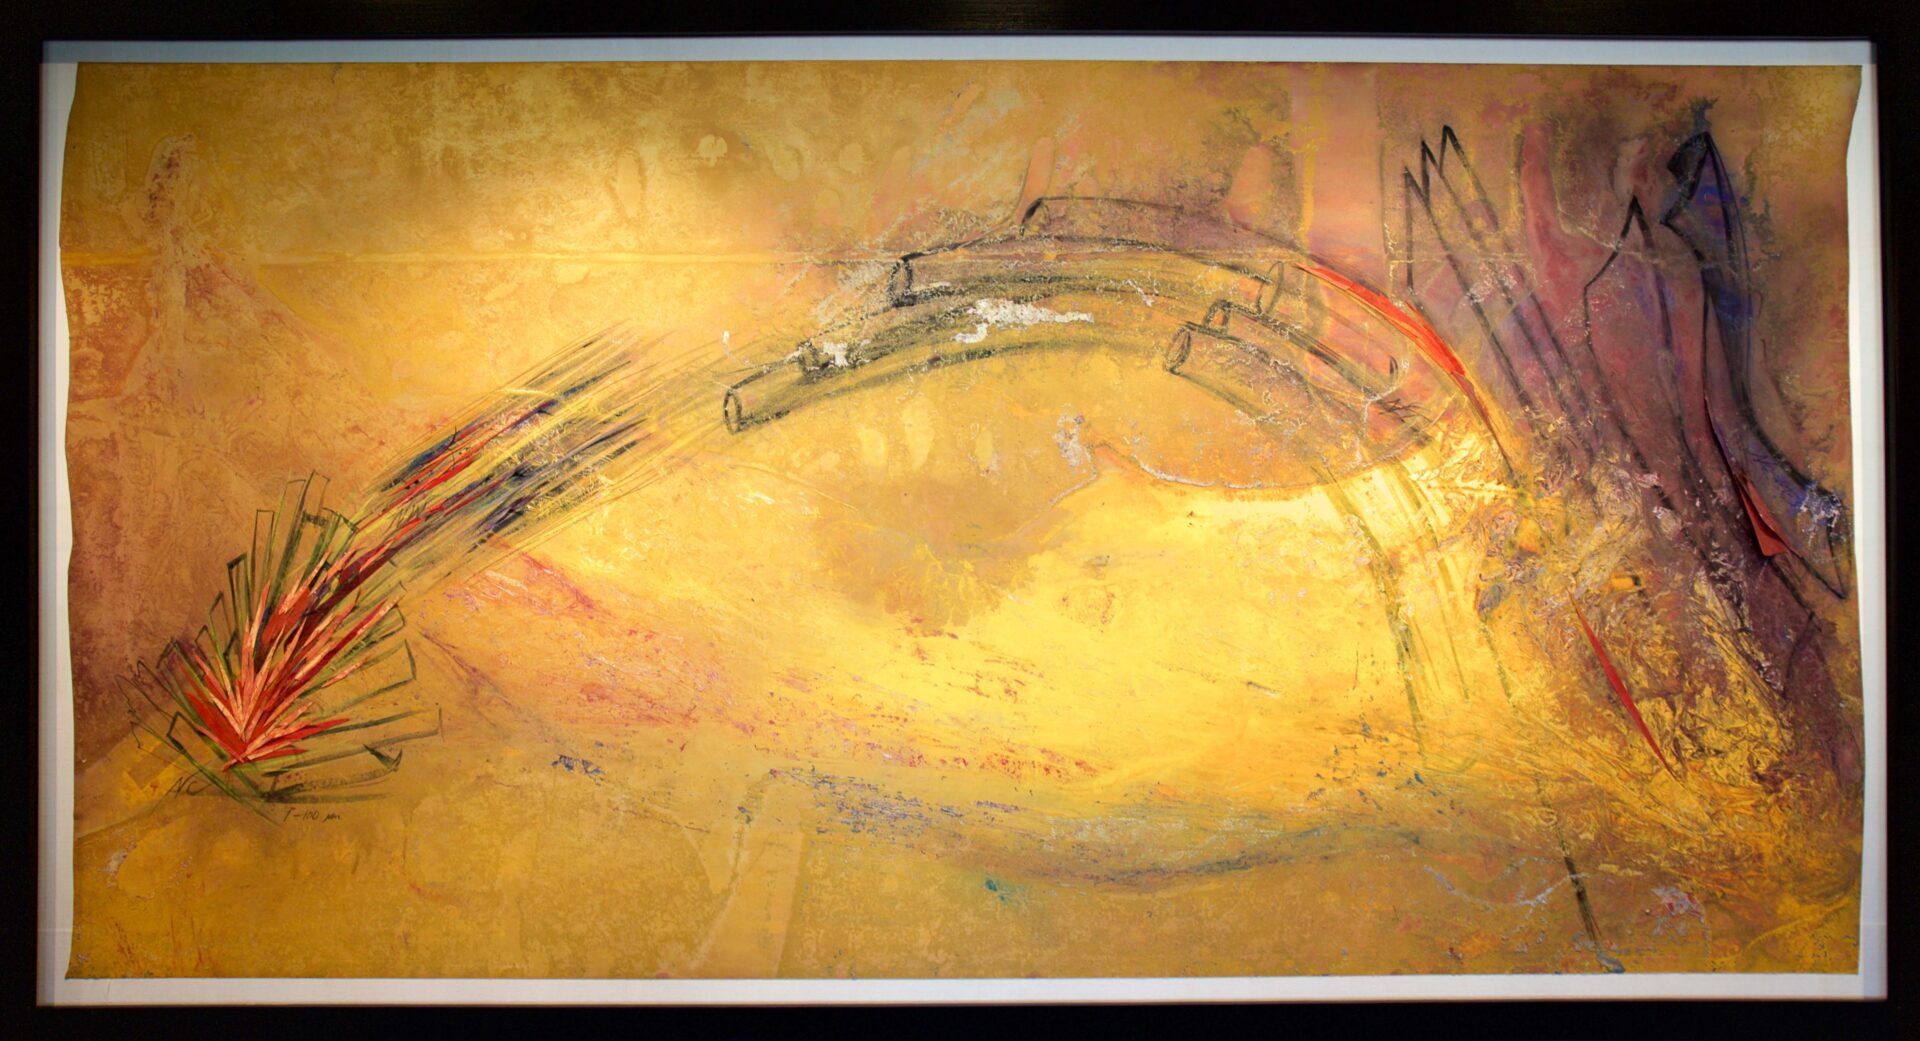 A painting of an eye with musical notes coming out.